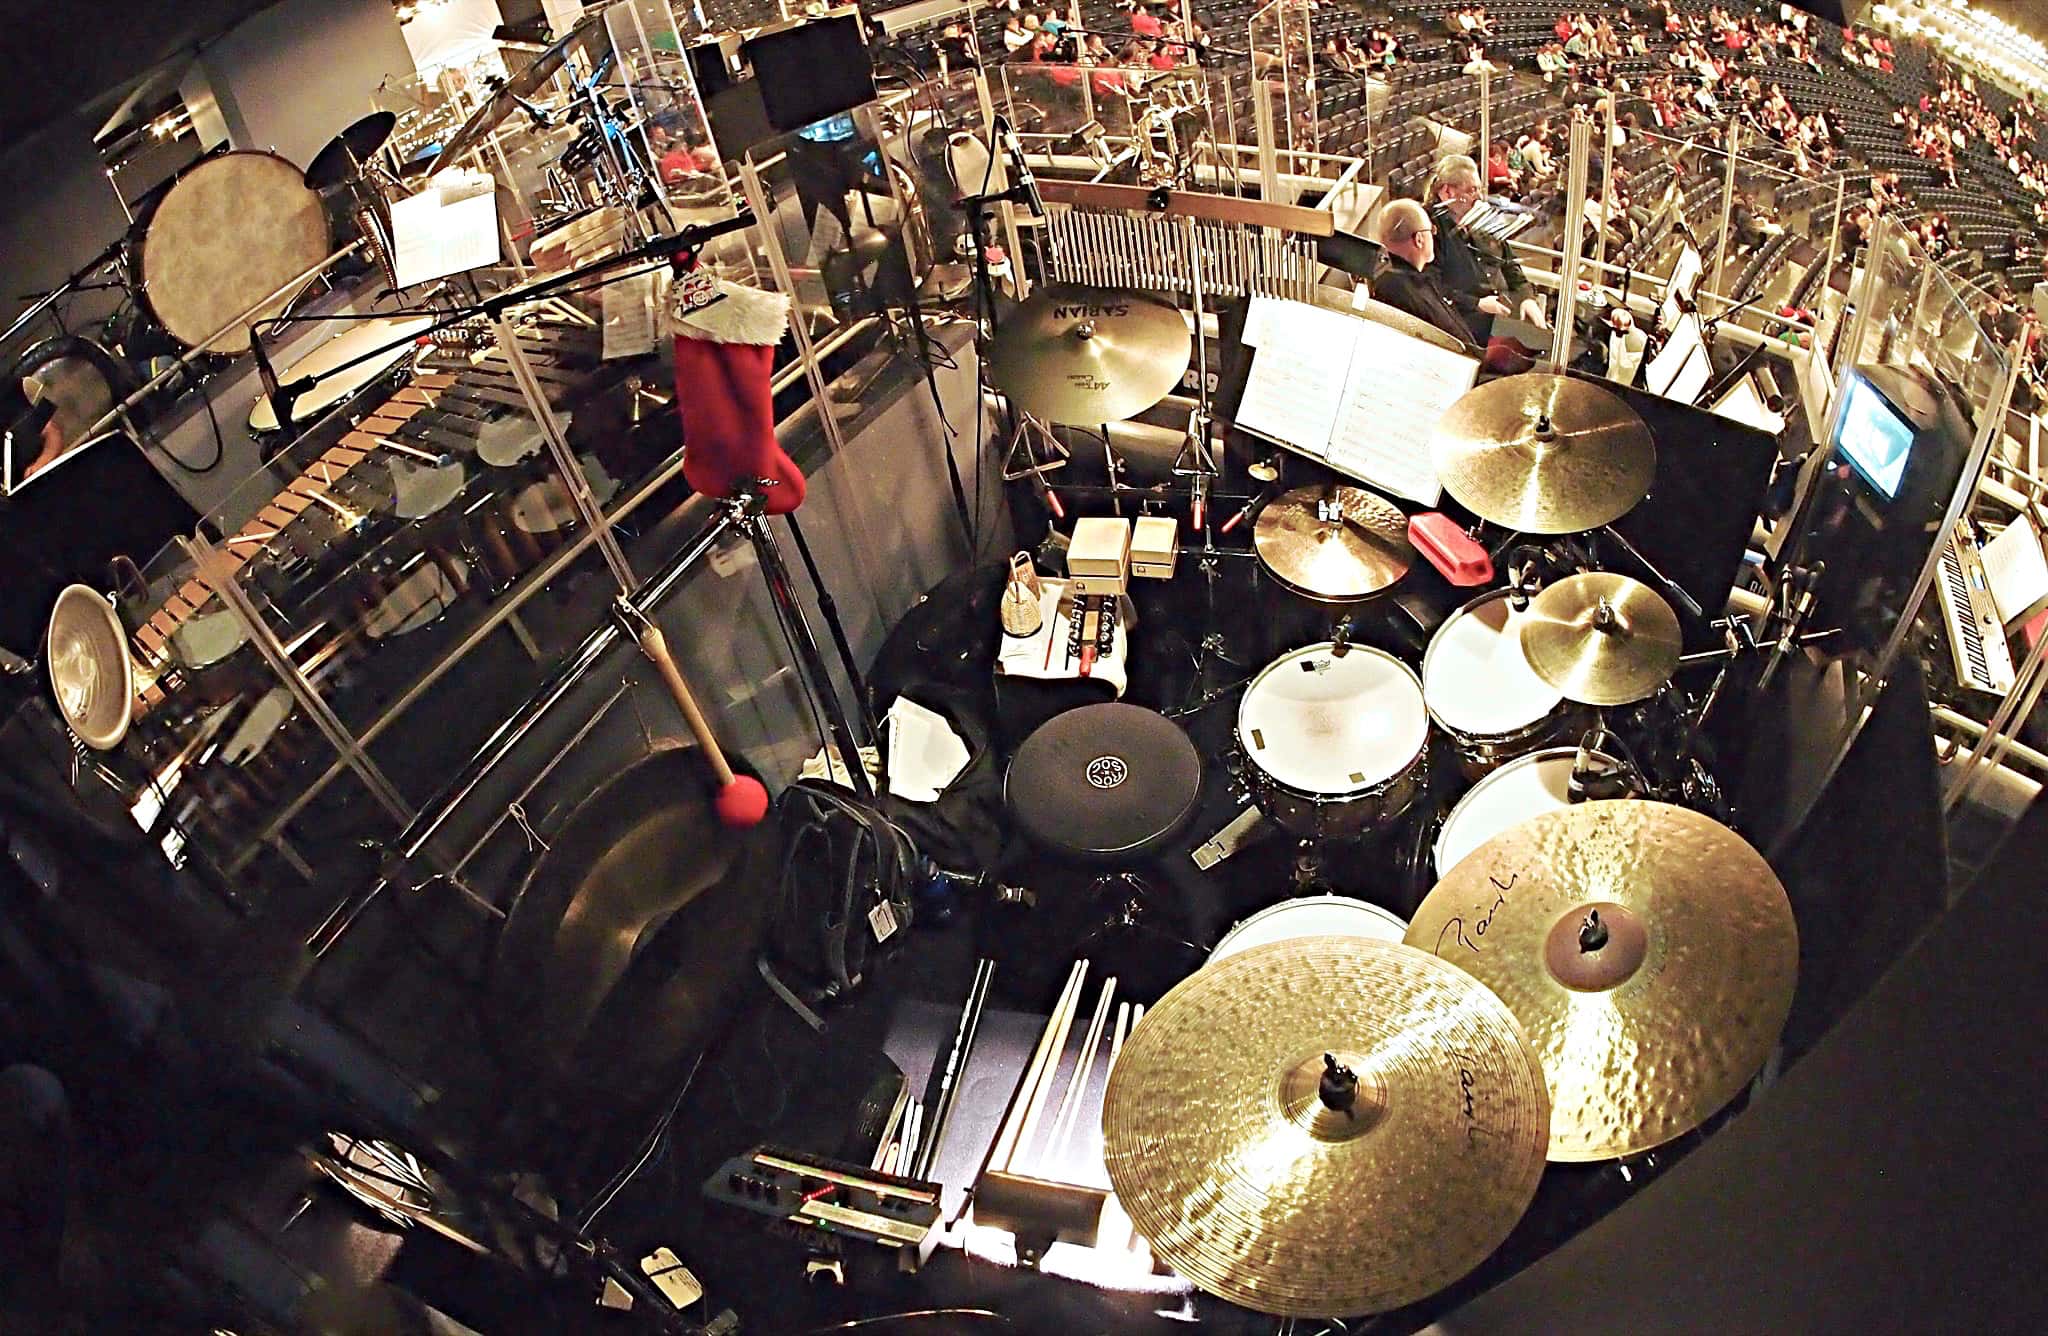 Greg Landes' drum set setup for the Madison Square Garden production of Dr Seuss' How the Grinch Stole Christmas.